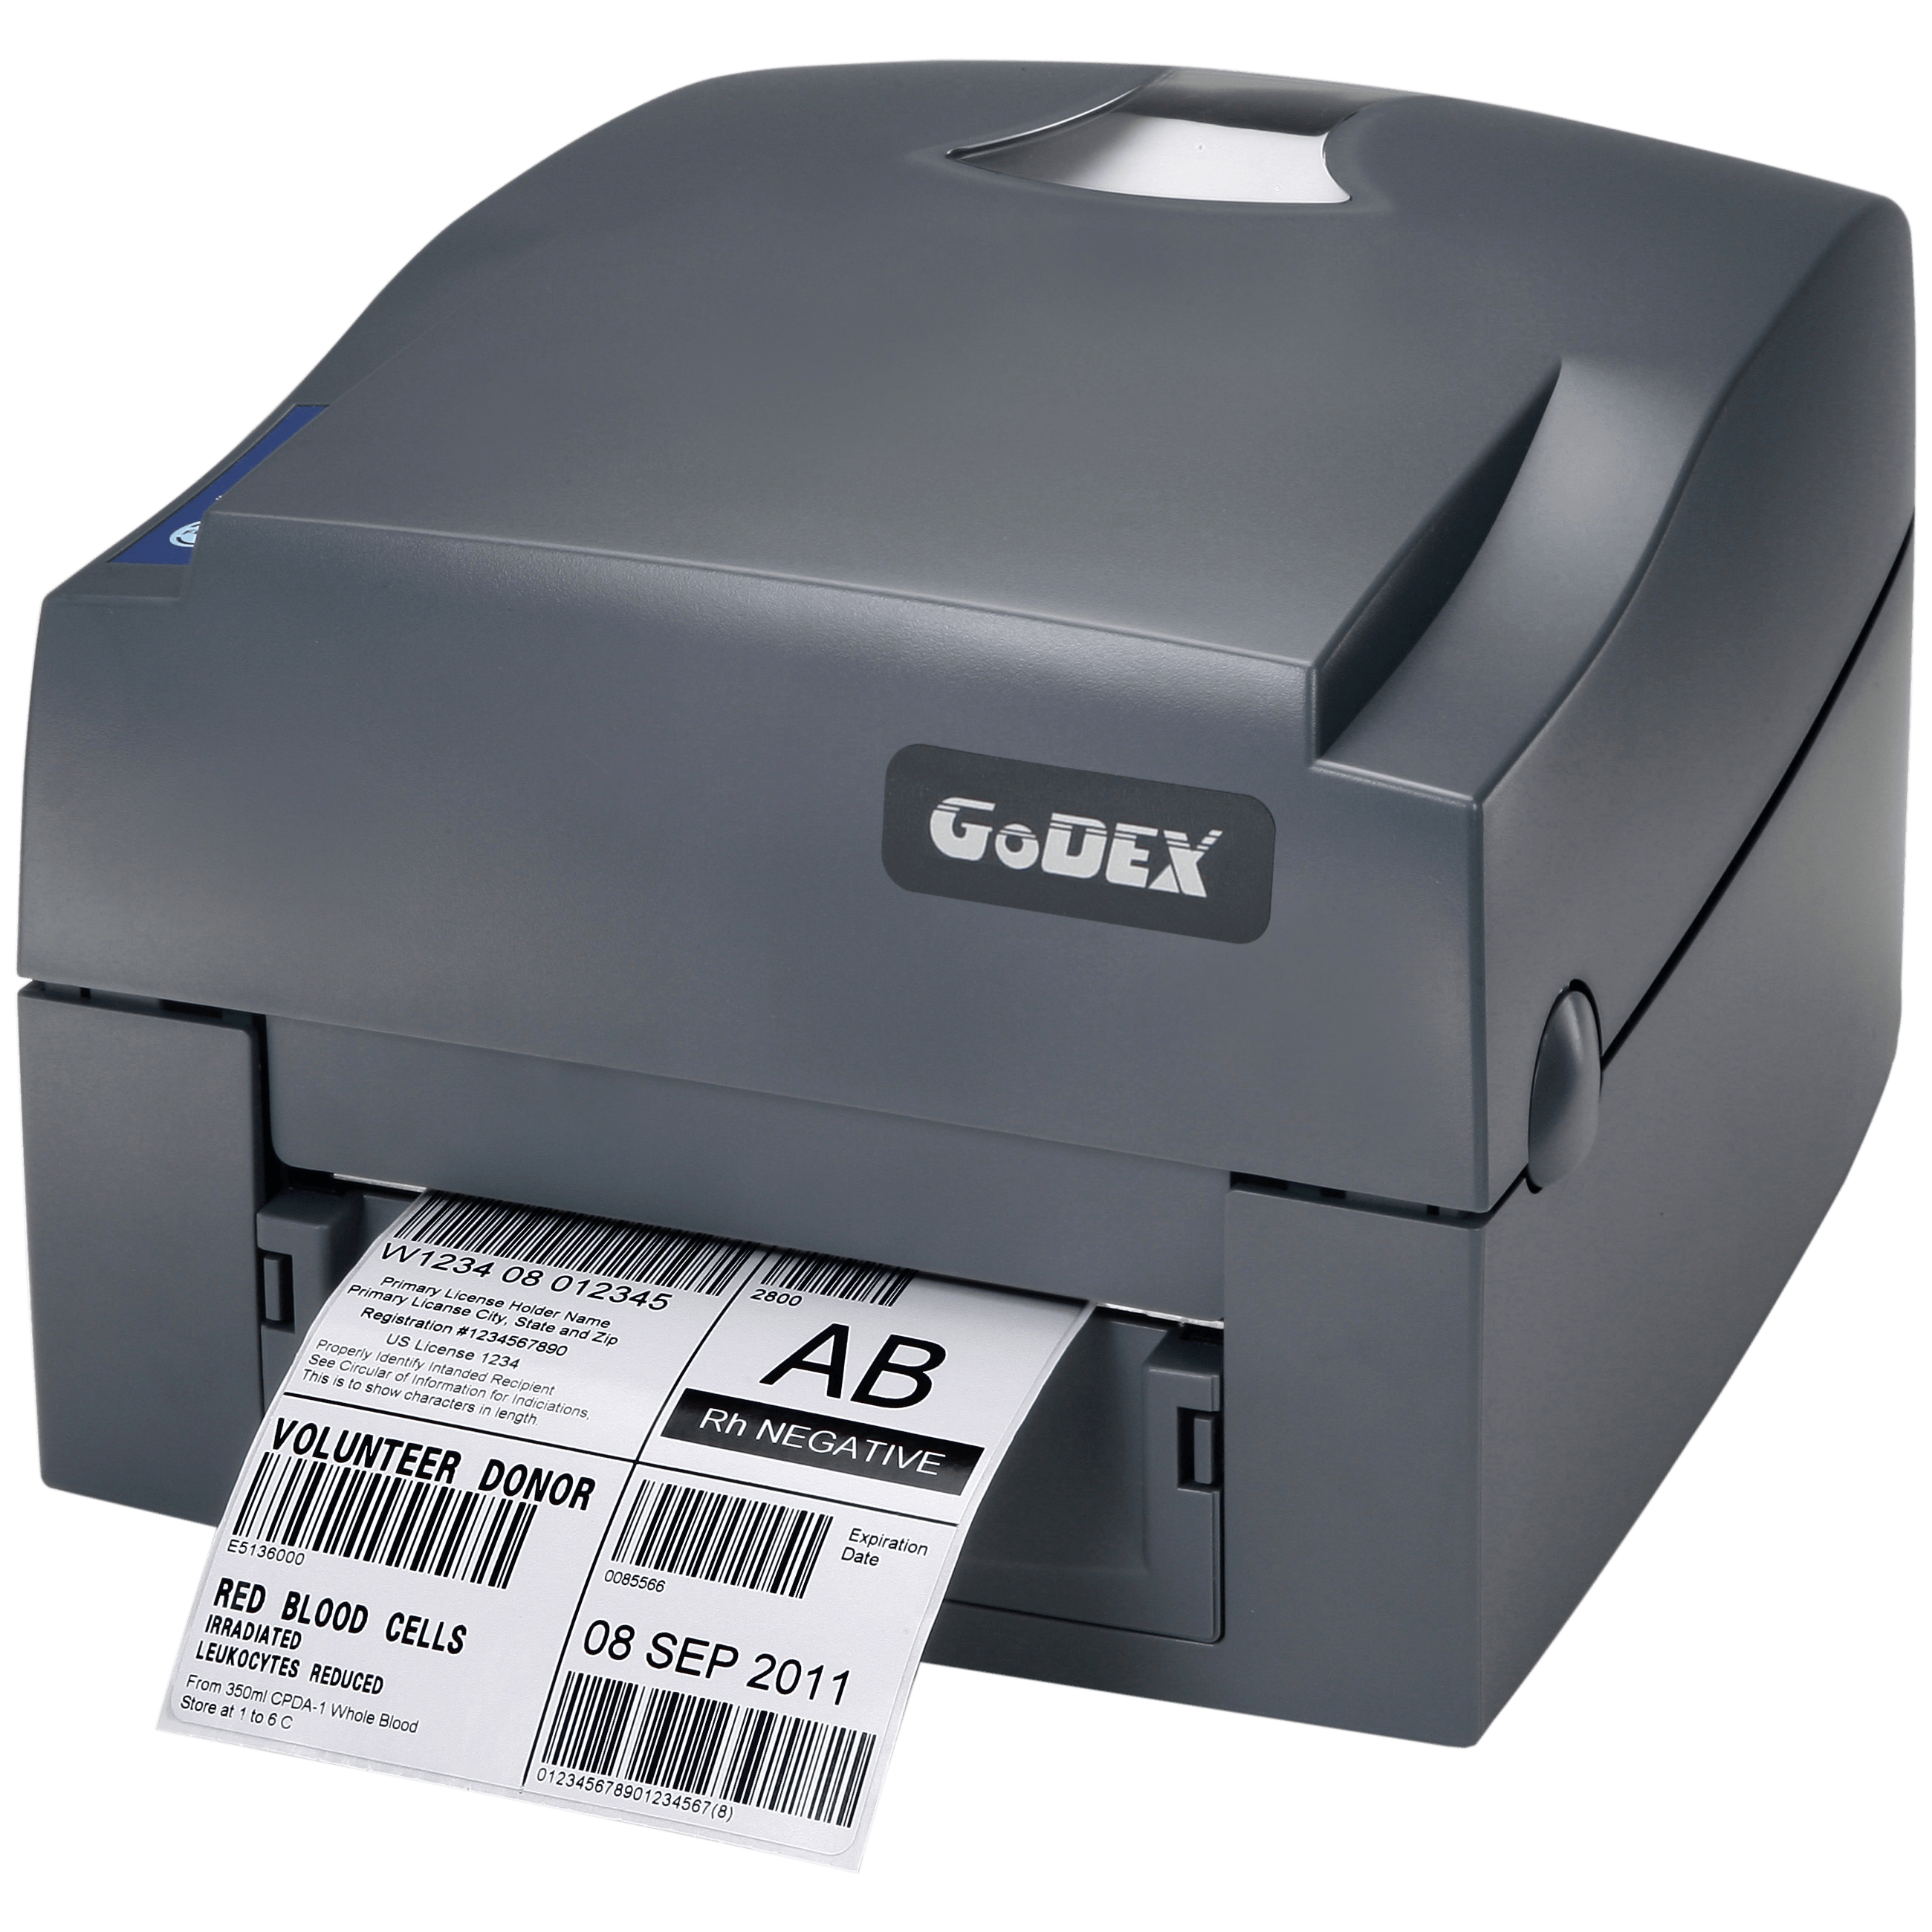 Featured image for “Godex G500”